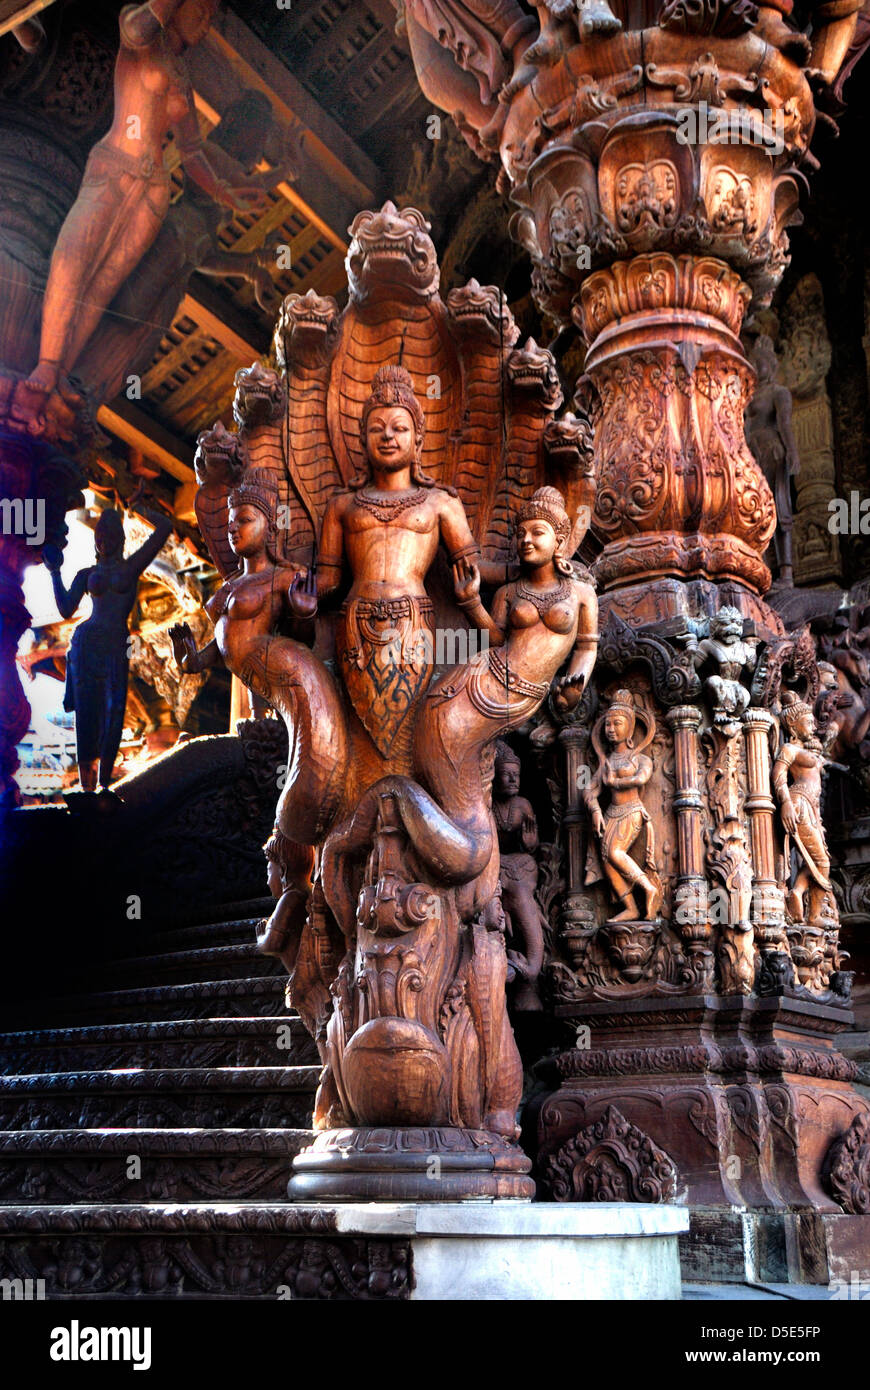 Wood carvings at the sanctuary of truth pattaya Thailand taken on the 28/02/2013 Stock Photo